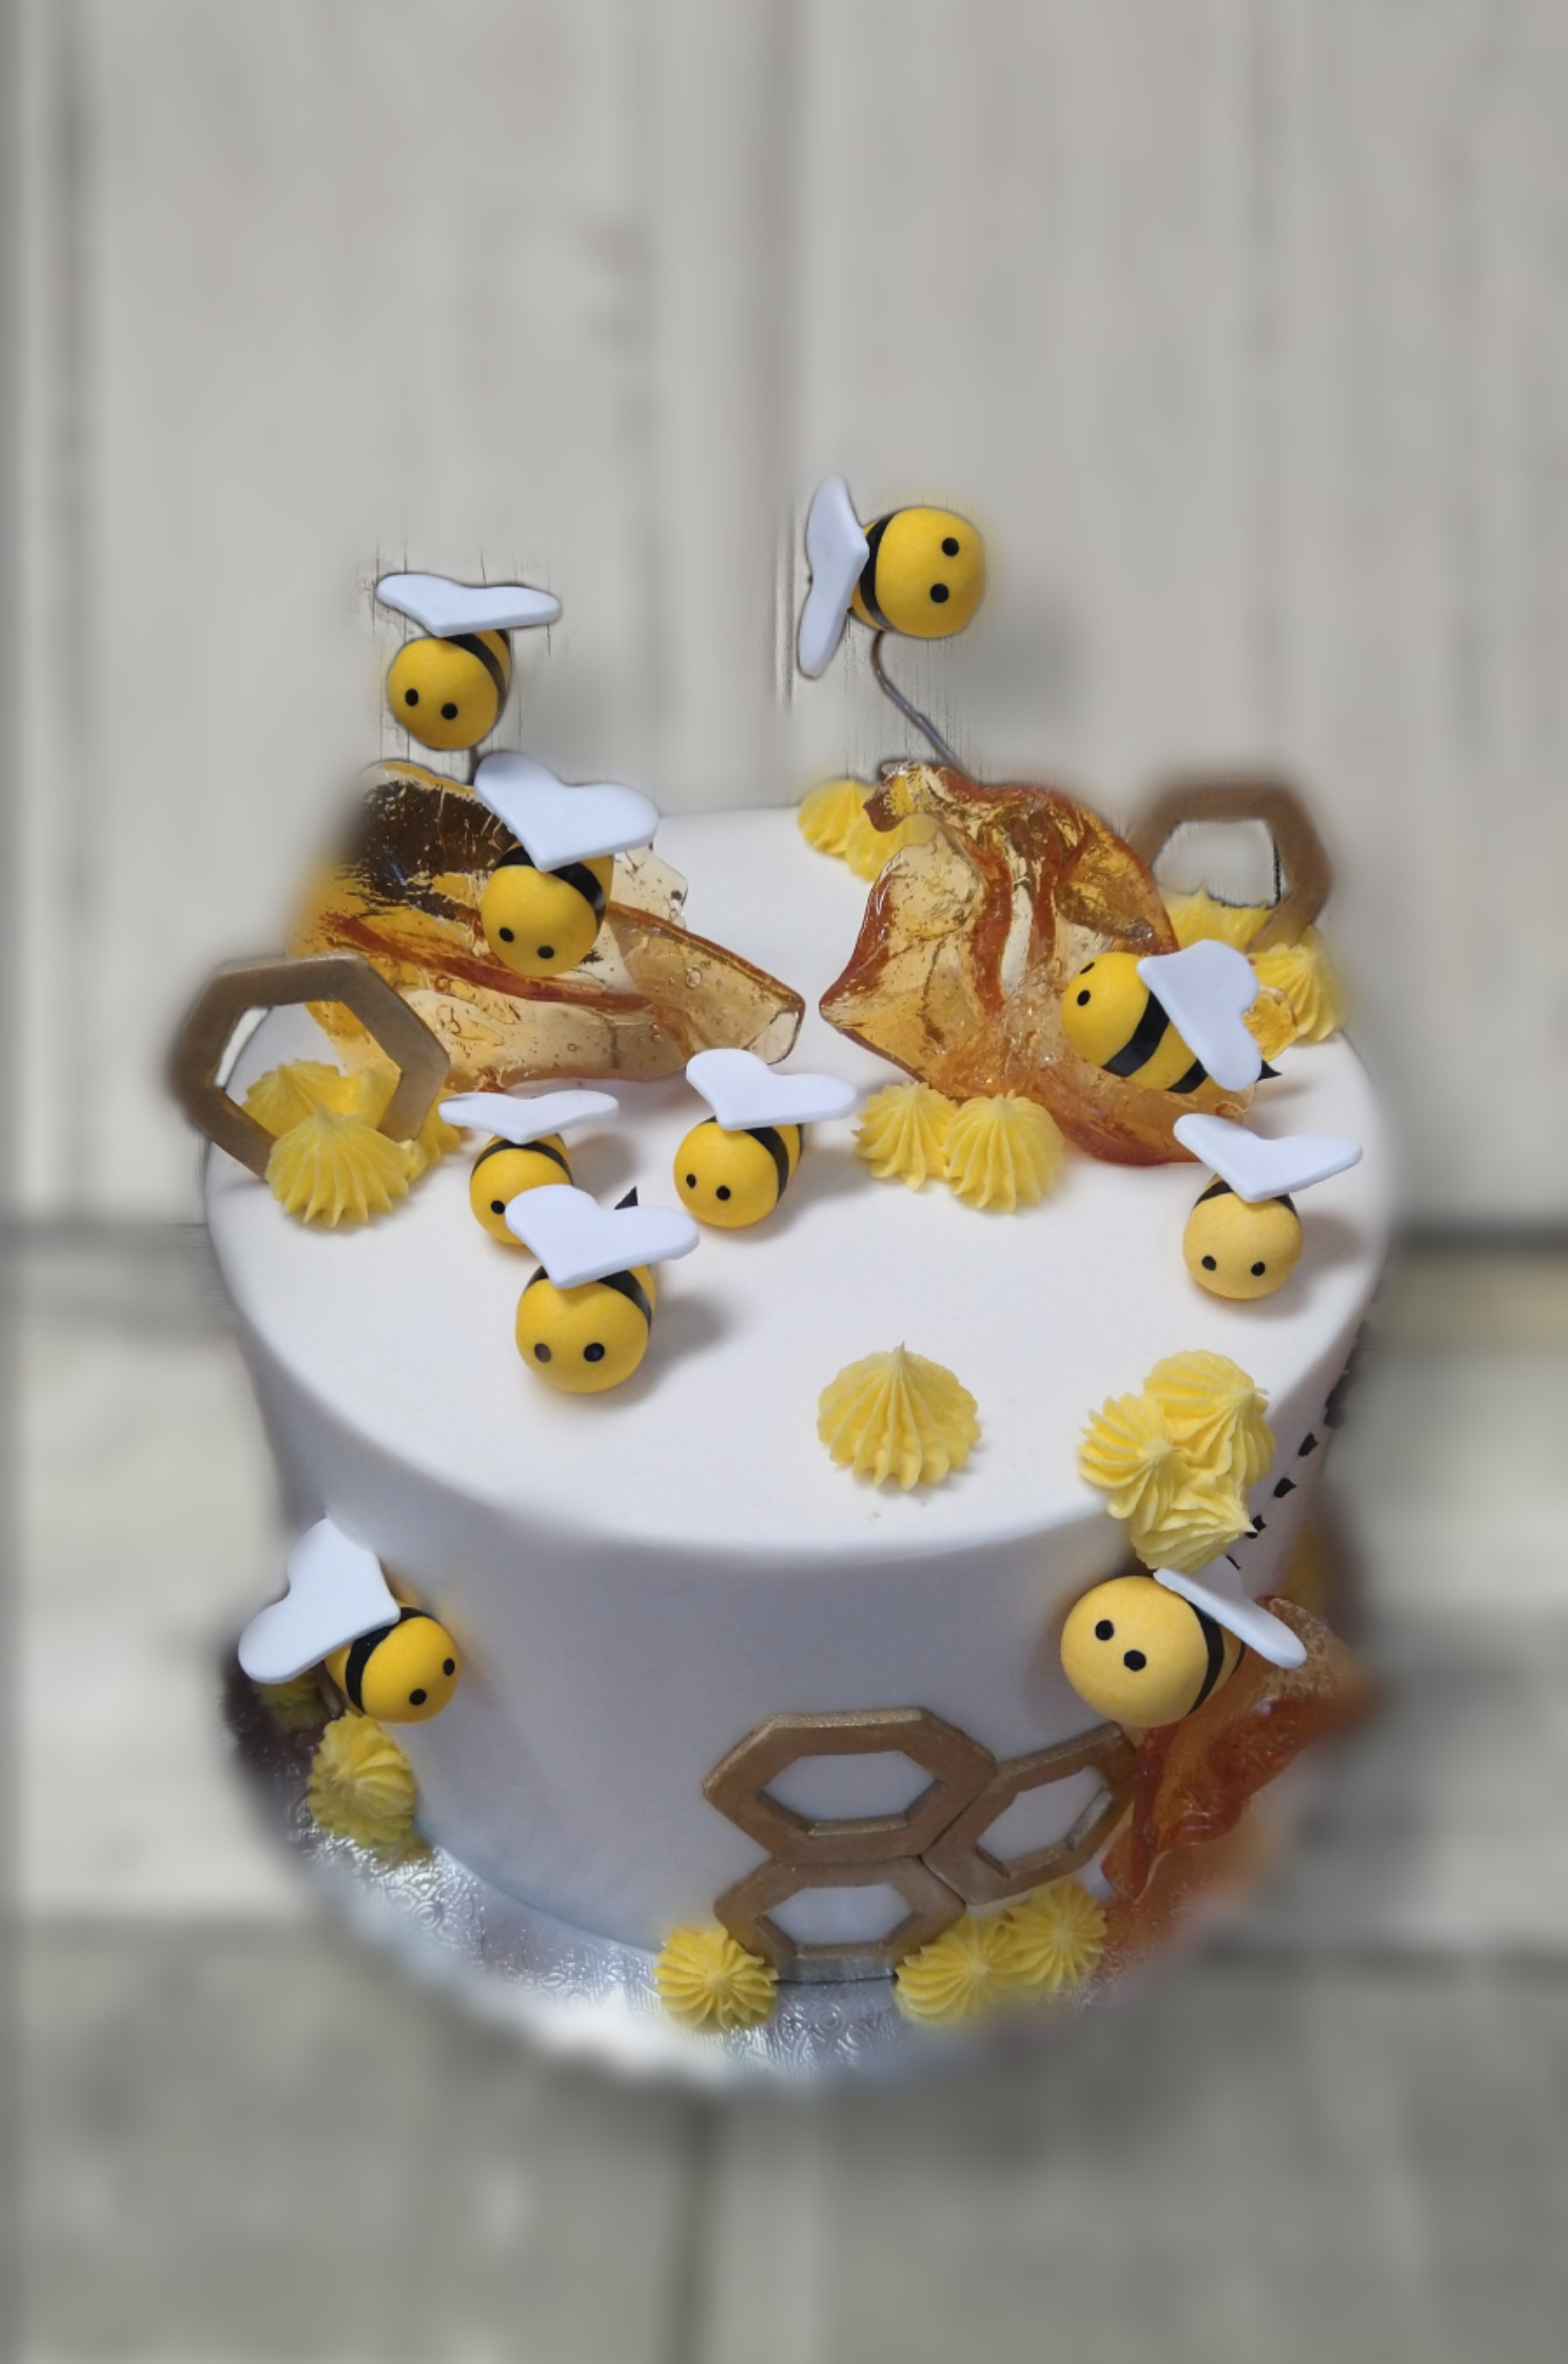 Bee Themed Baby Shower Cake